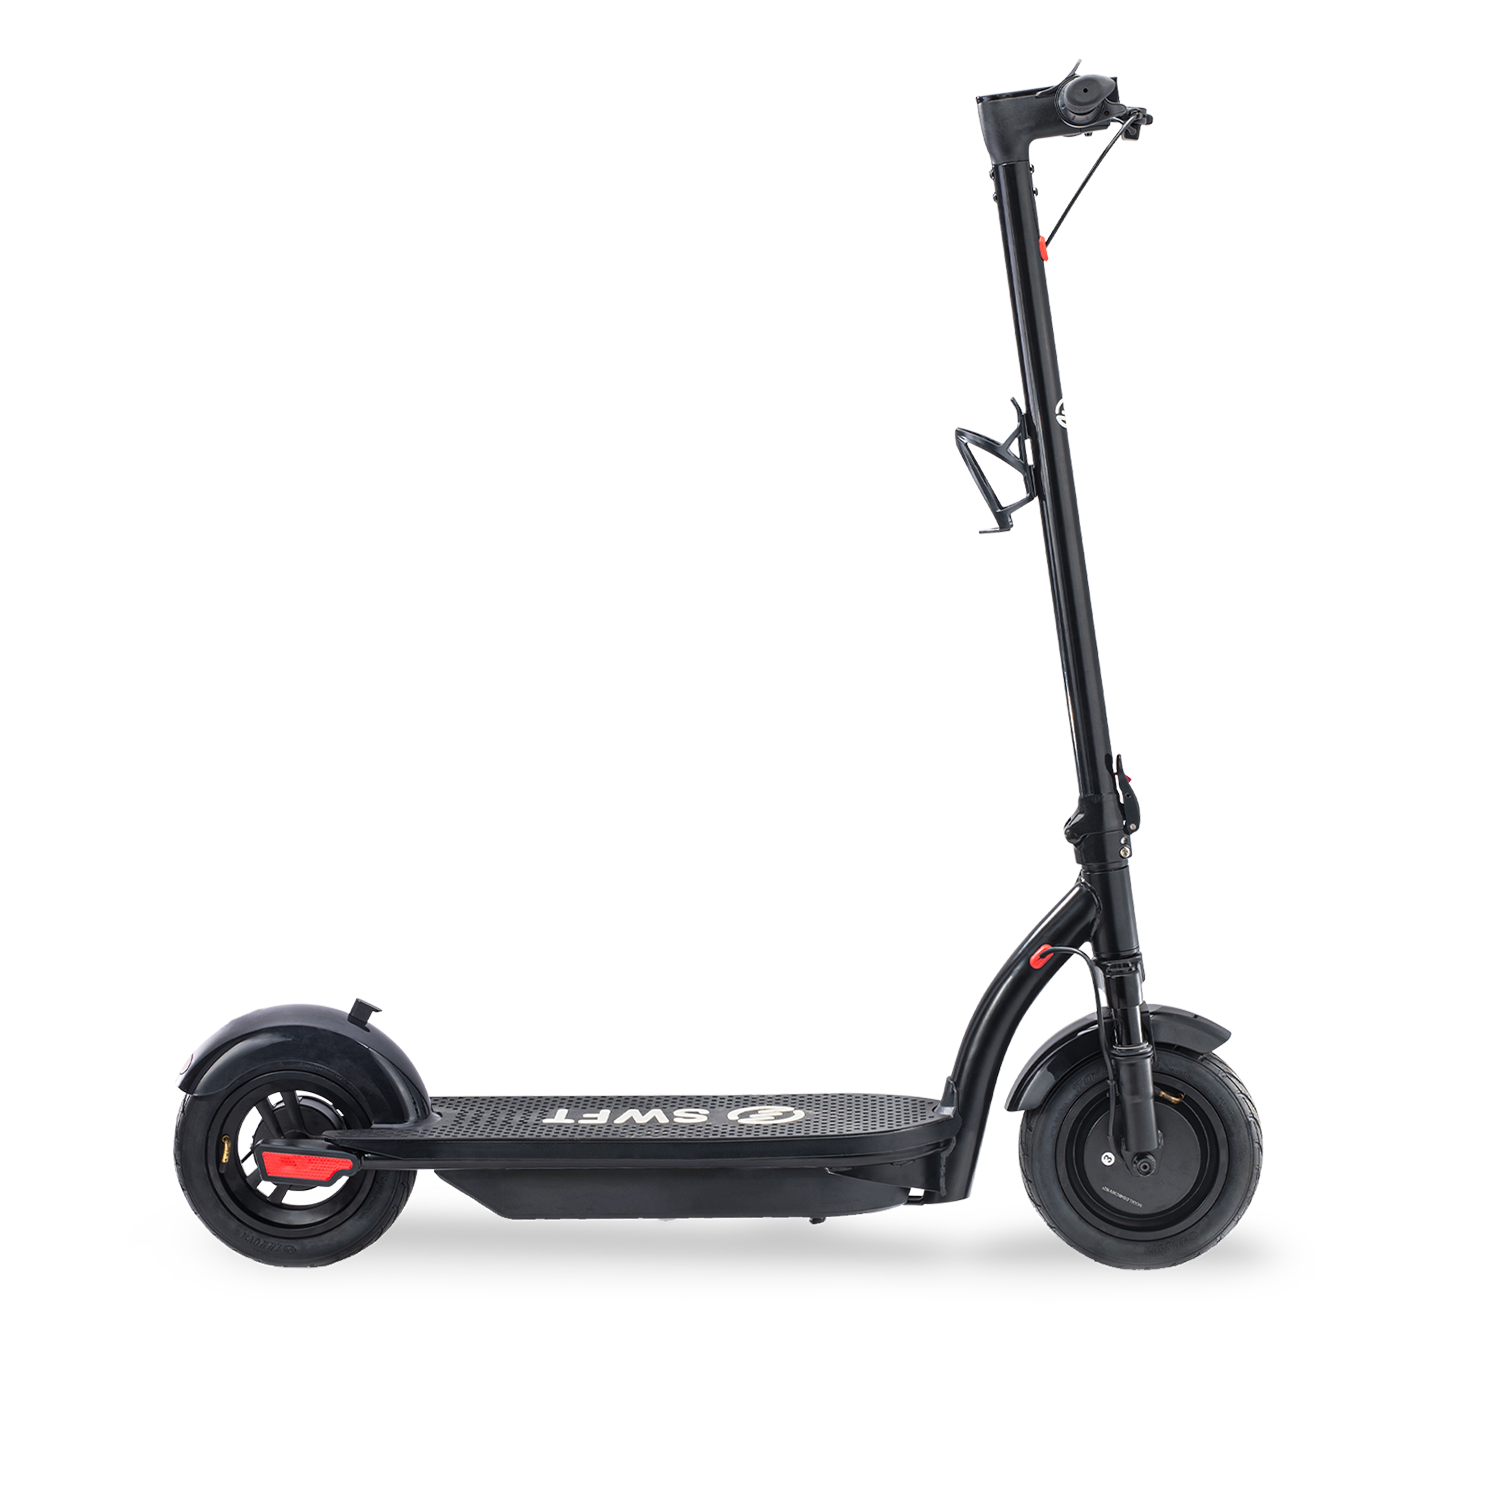 SWFT Phoenix 450W Folding E-Scooter with Built-in Suspension